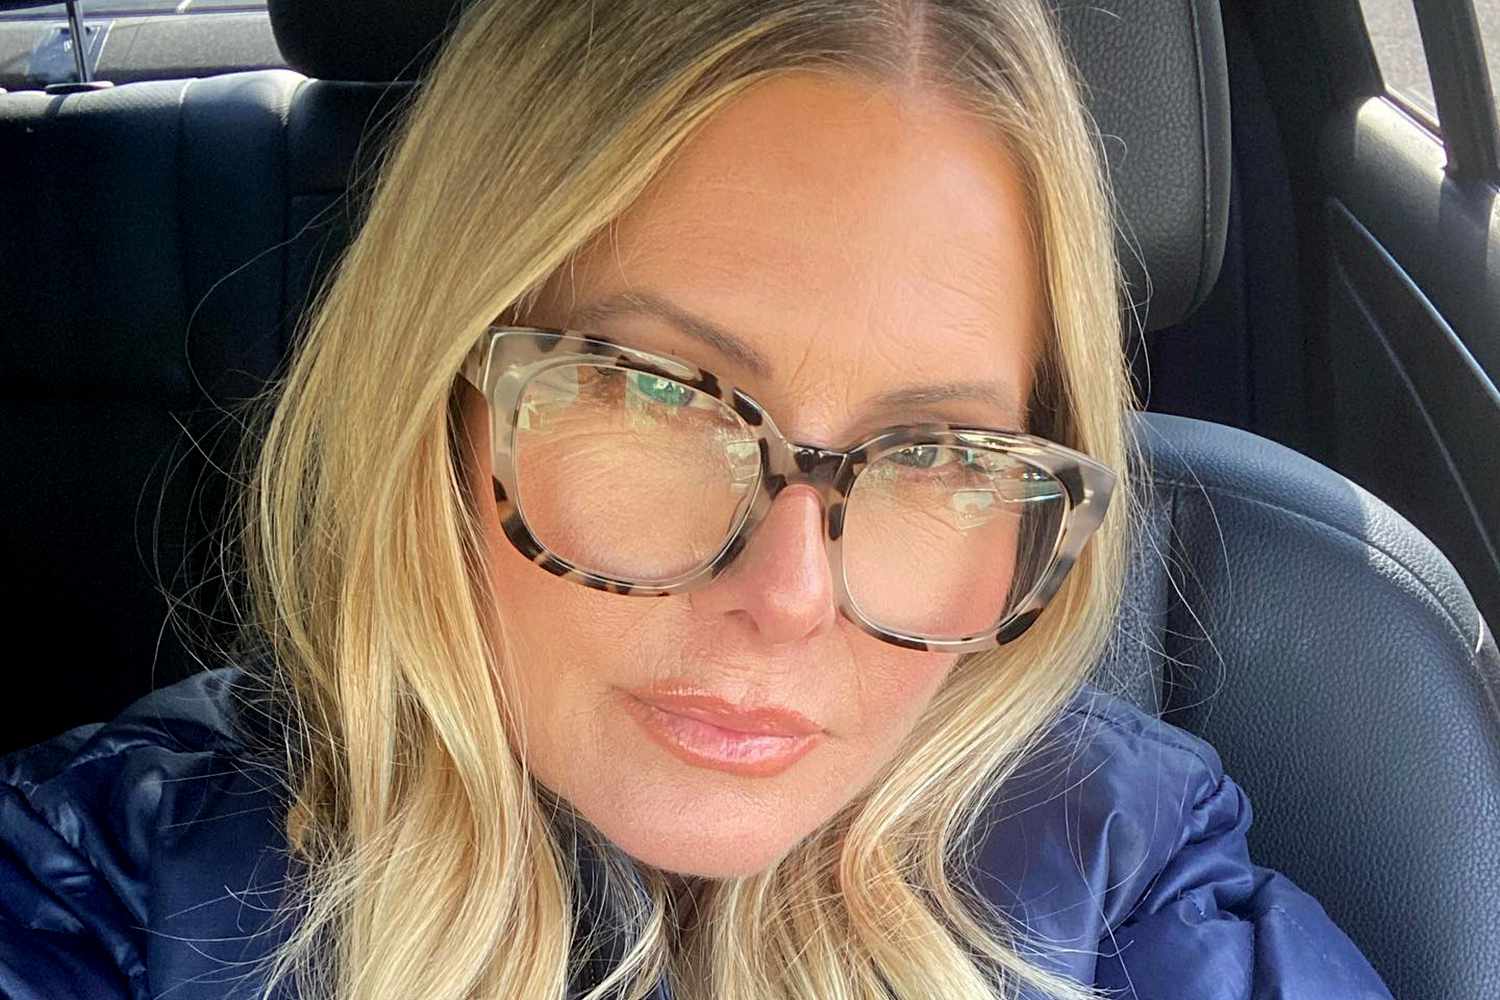 nicole-eggert-receives-overwhelming-support-from-celebrities-after-cancer-disclosure